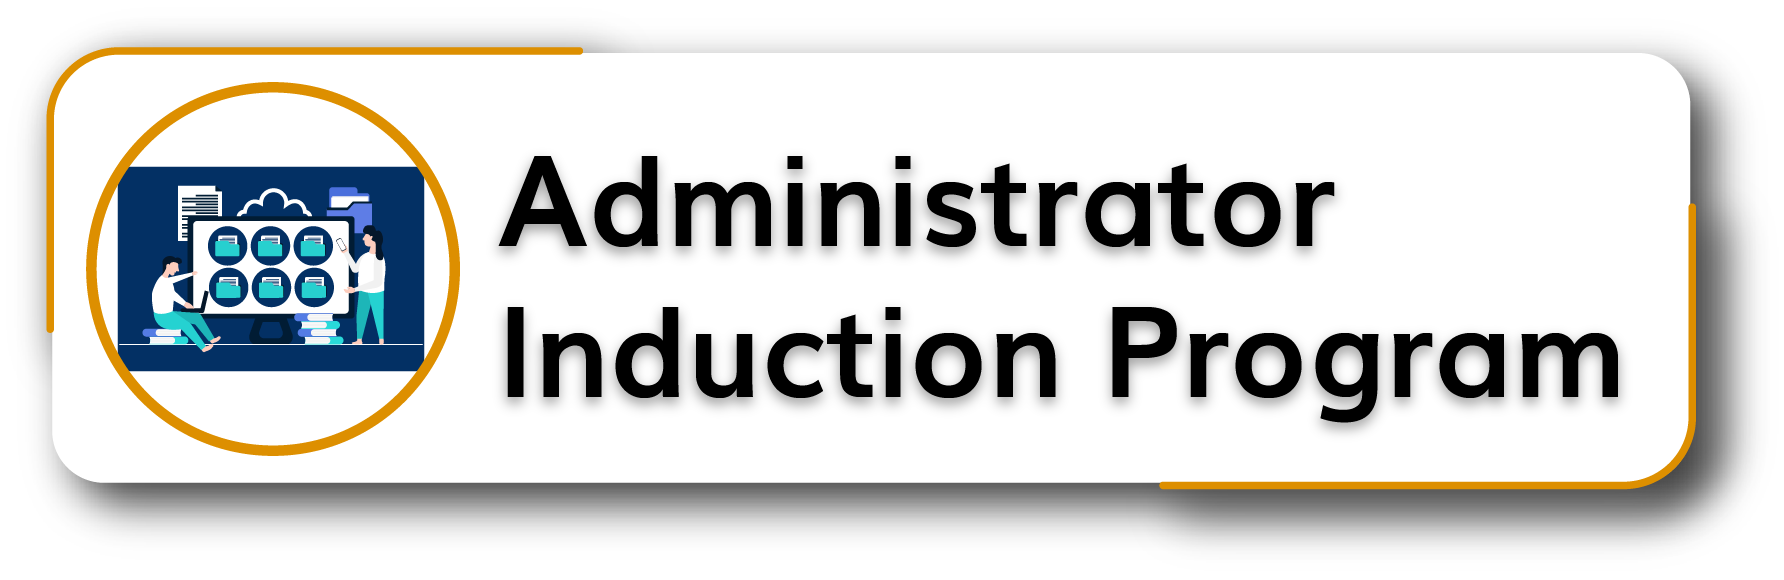 Administrator Induction Program Button